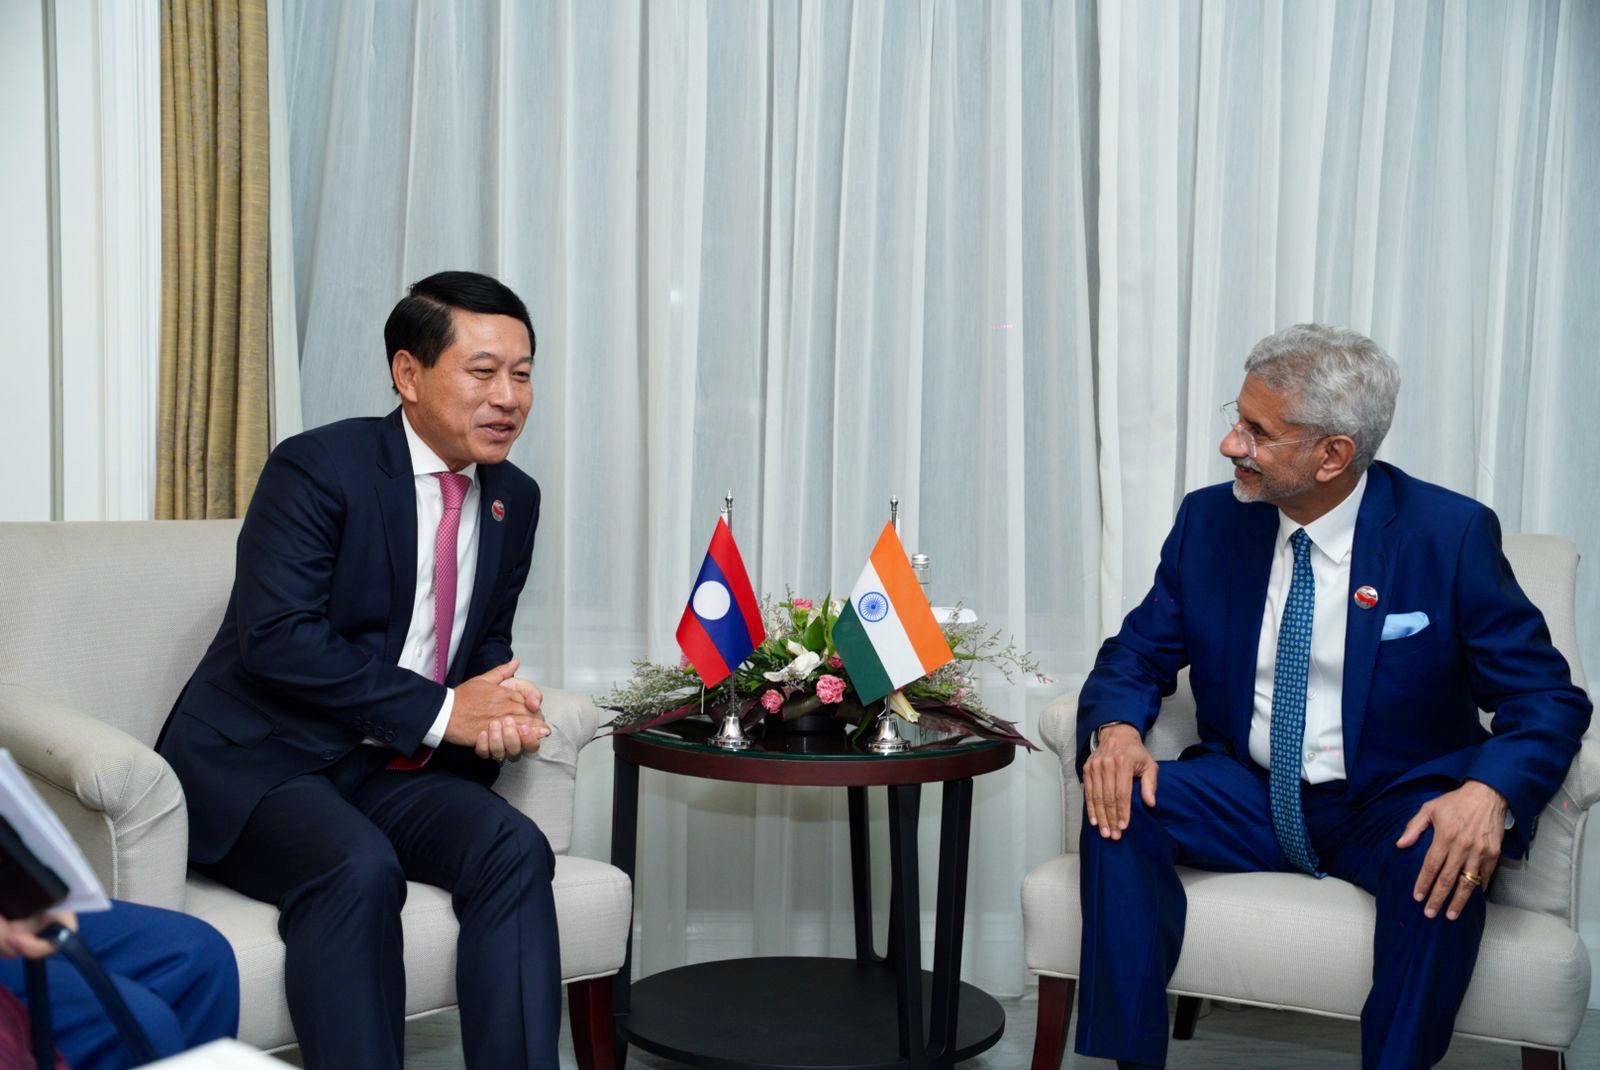 External Affairs Minister Dr. S. Jaishankar met H.E. Mr. Saleumxay Kommasith, Deputy Prime Minister and Minister of Foreign Affairs of Laos in Indonesia